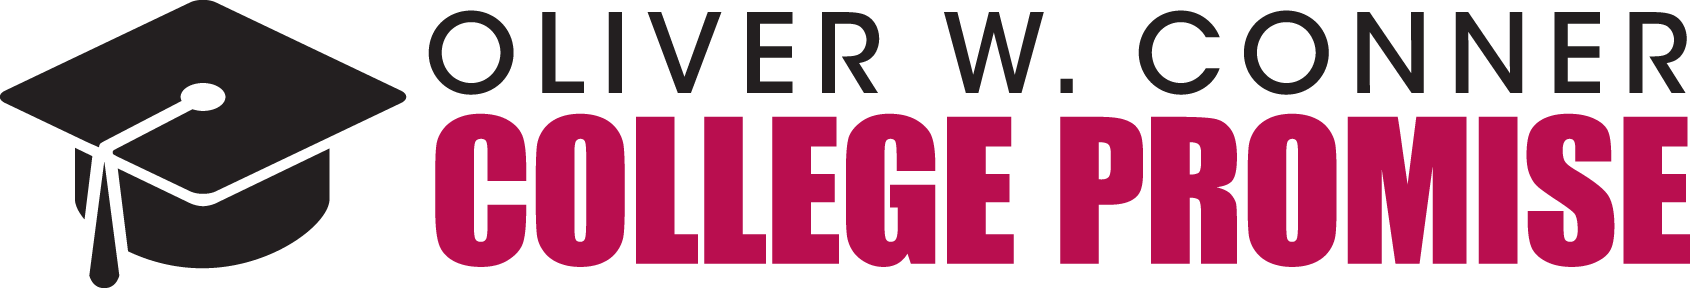 The Oliver W. Conner College Promise logo